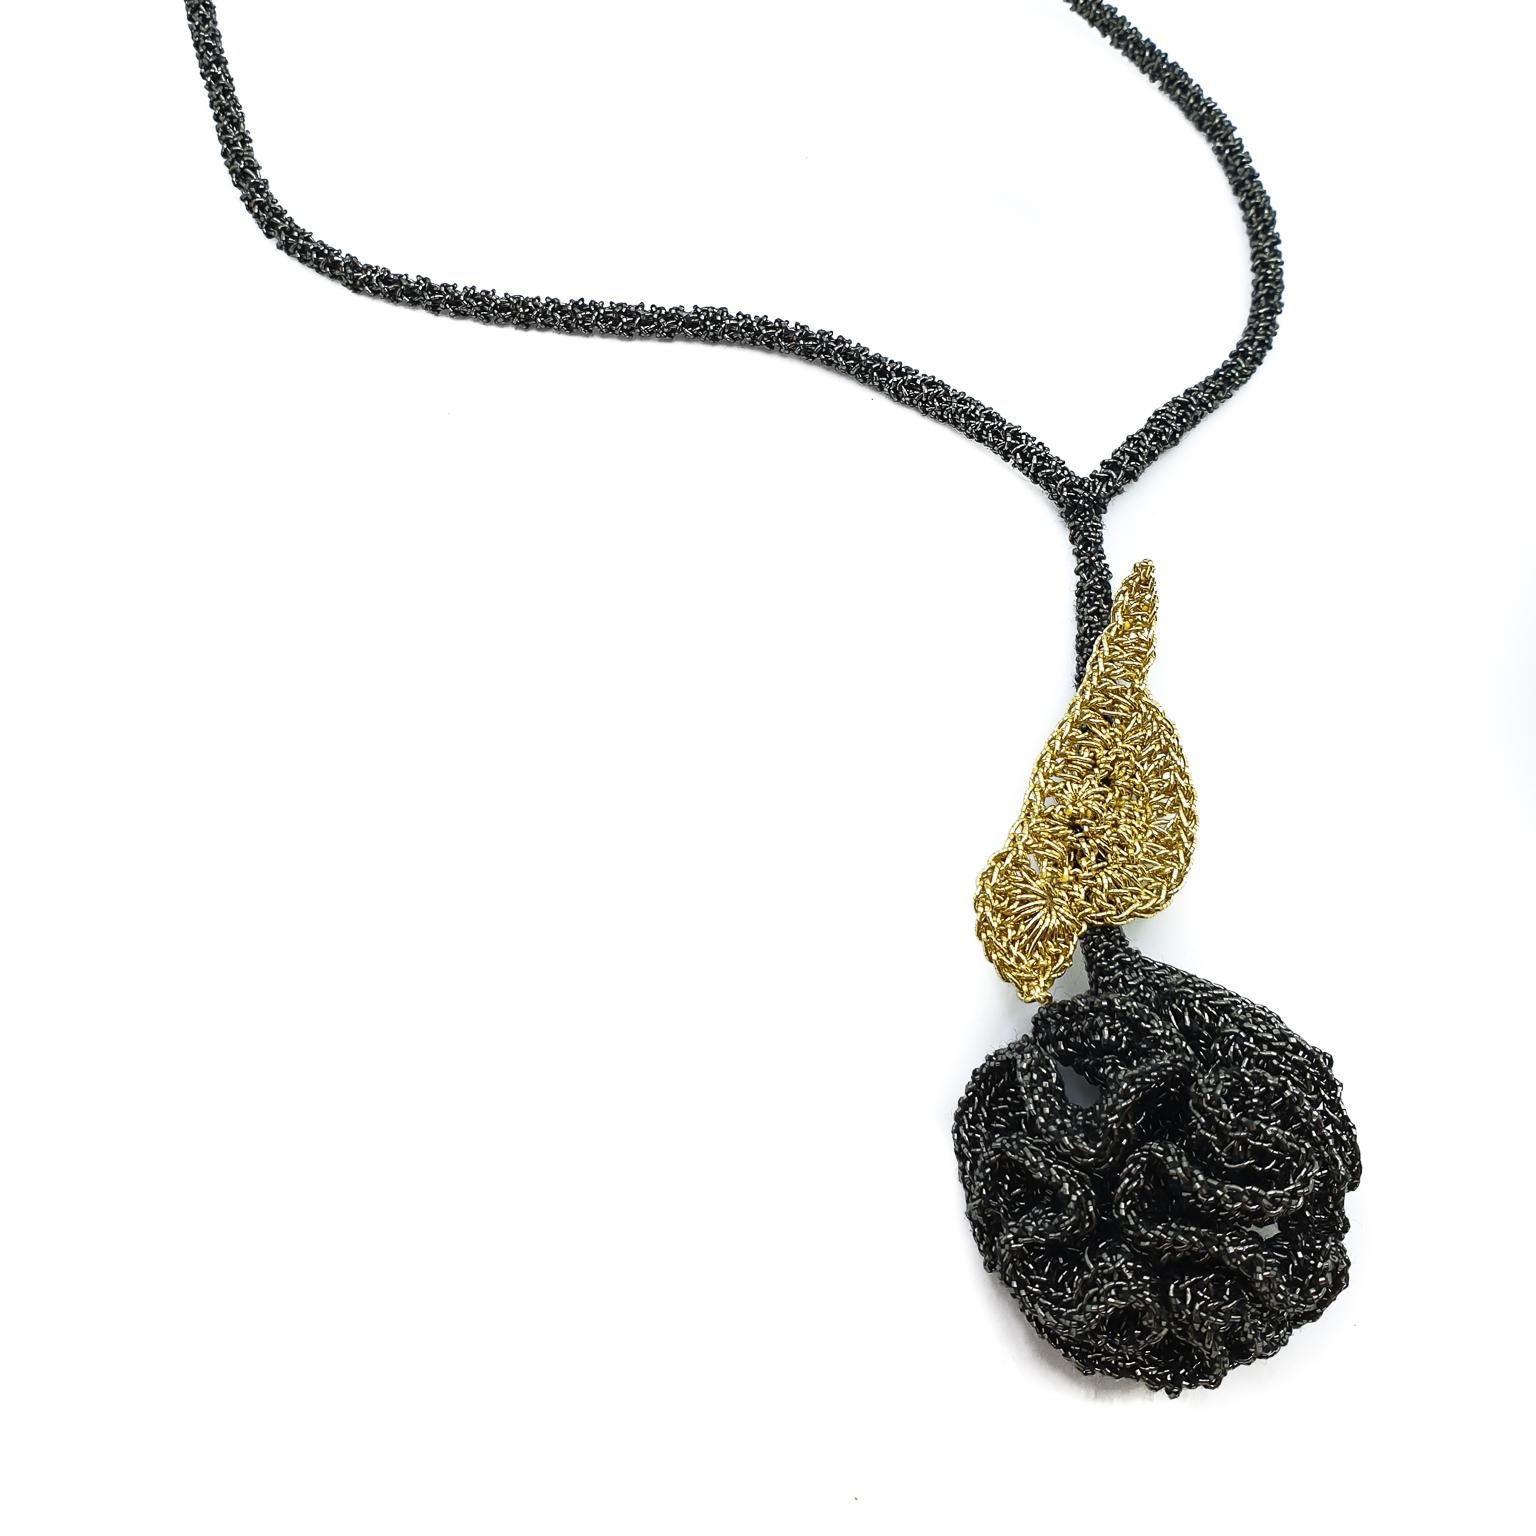 A flower can not  blossom without the sunshine. A crochet golden bird on a black thread flower necklace. It is shedding light and warmth wherever it lands.
 
This delicate necklace is crochet with a smooth passing thread. It is a cotton thread